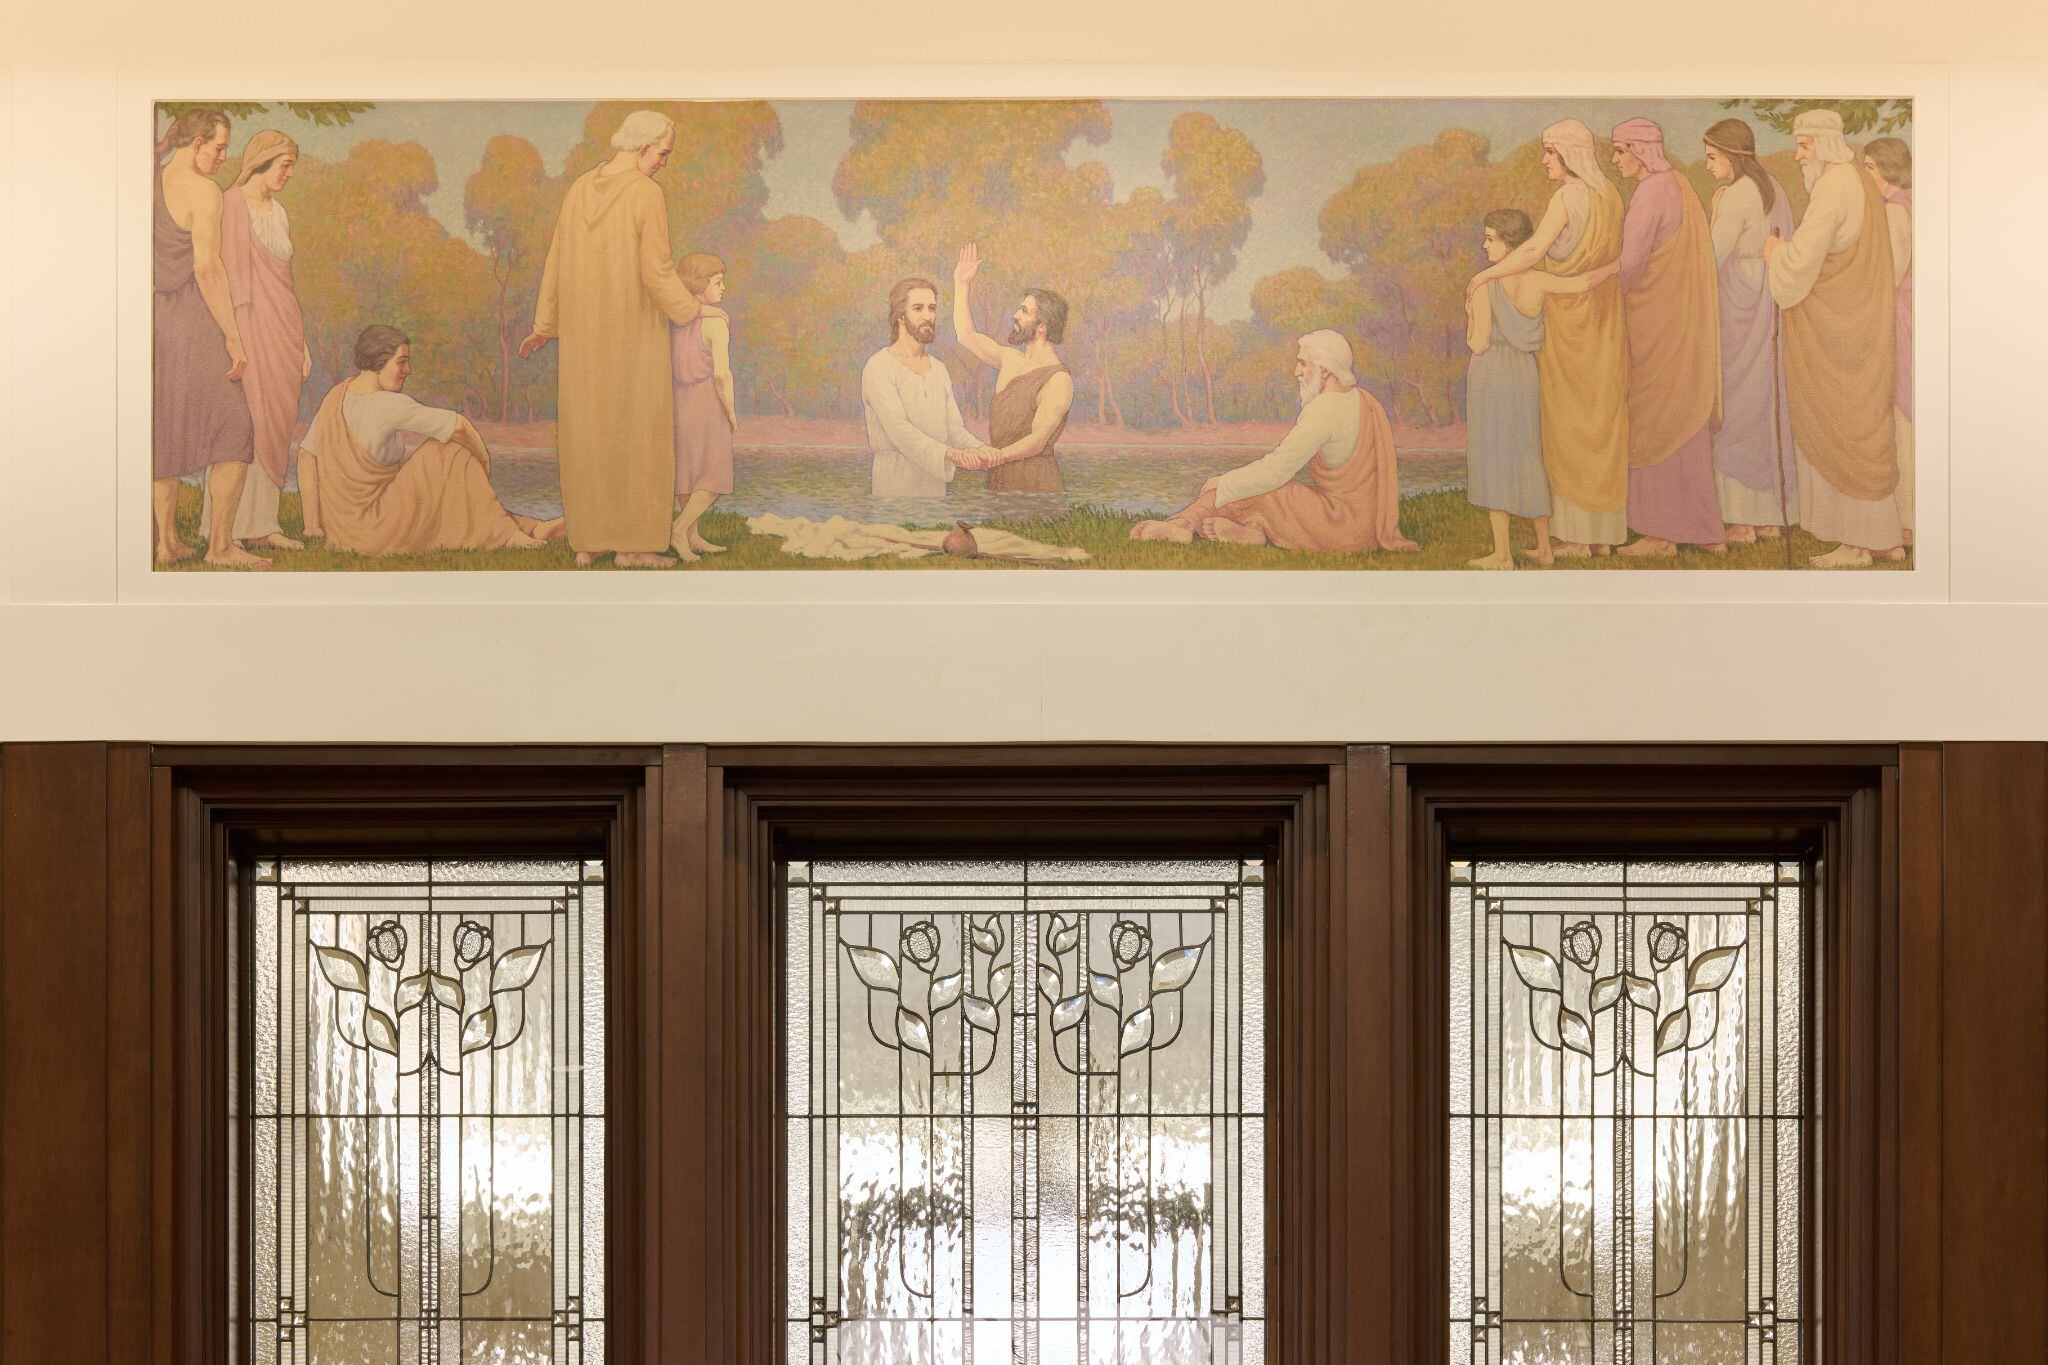 (The Church of Jesus Christ of Latter-day Saints) A mural above a window pane in the Layton Utah Temple. The mural shows the baptism of Jesus.